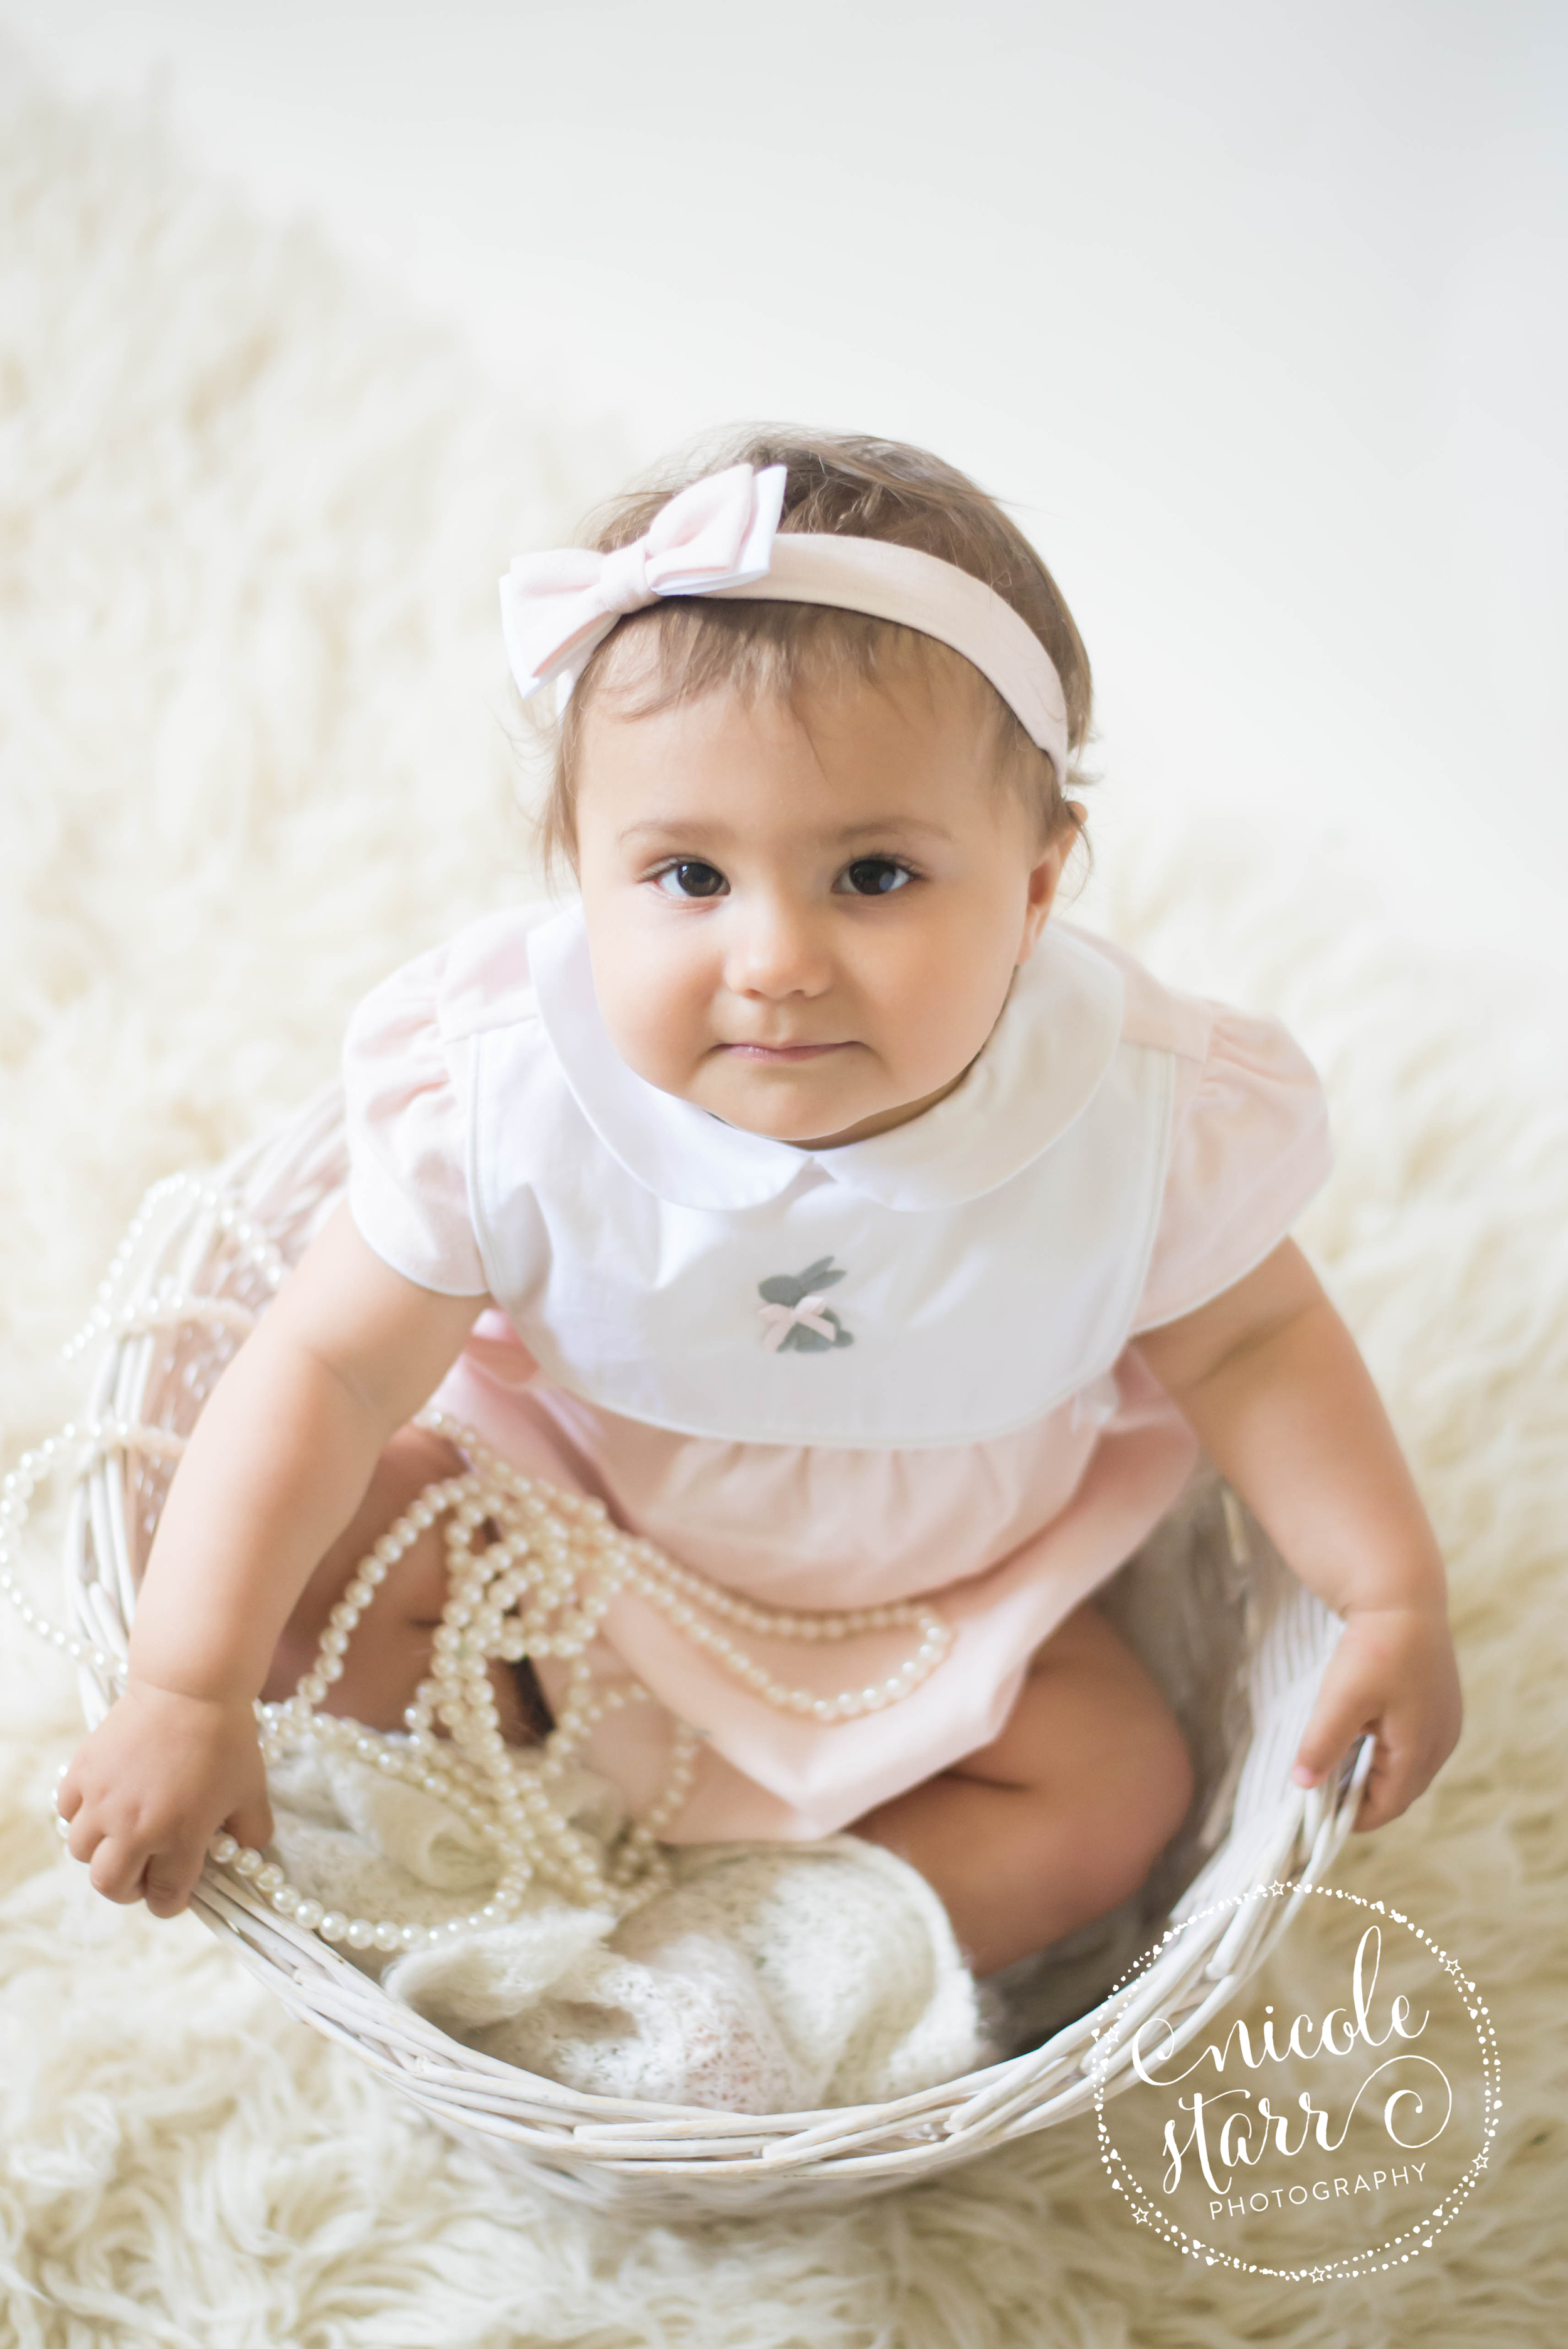 baby in a basket with pearls and a pink bunny dress